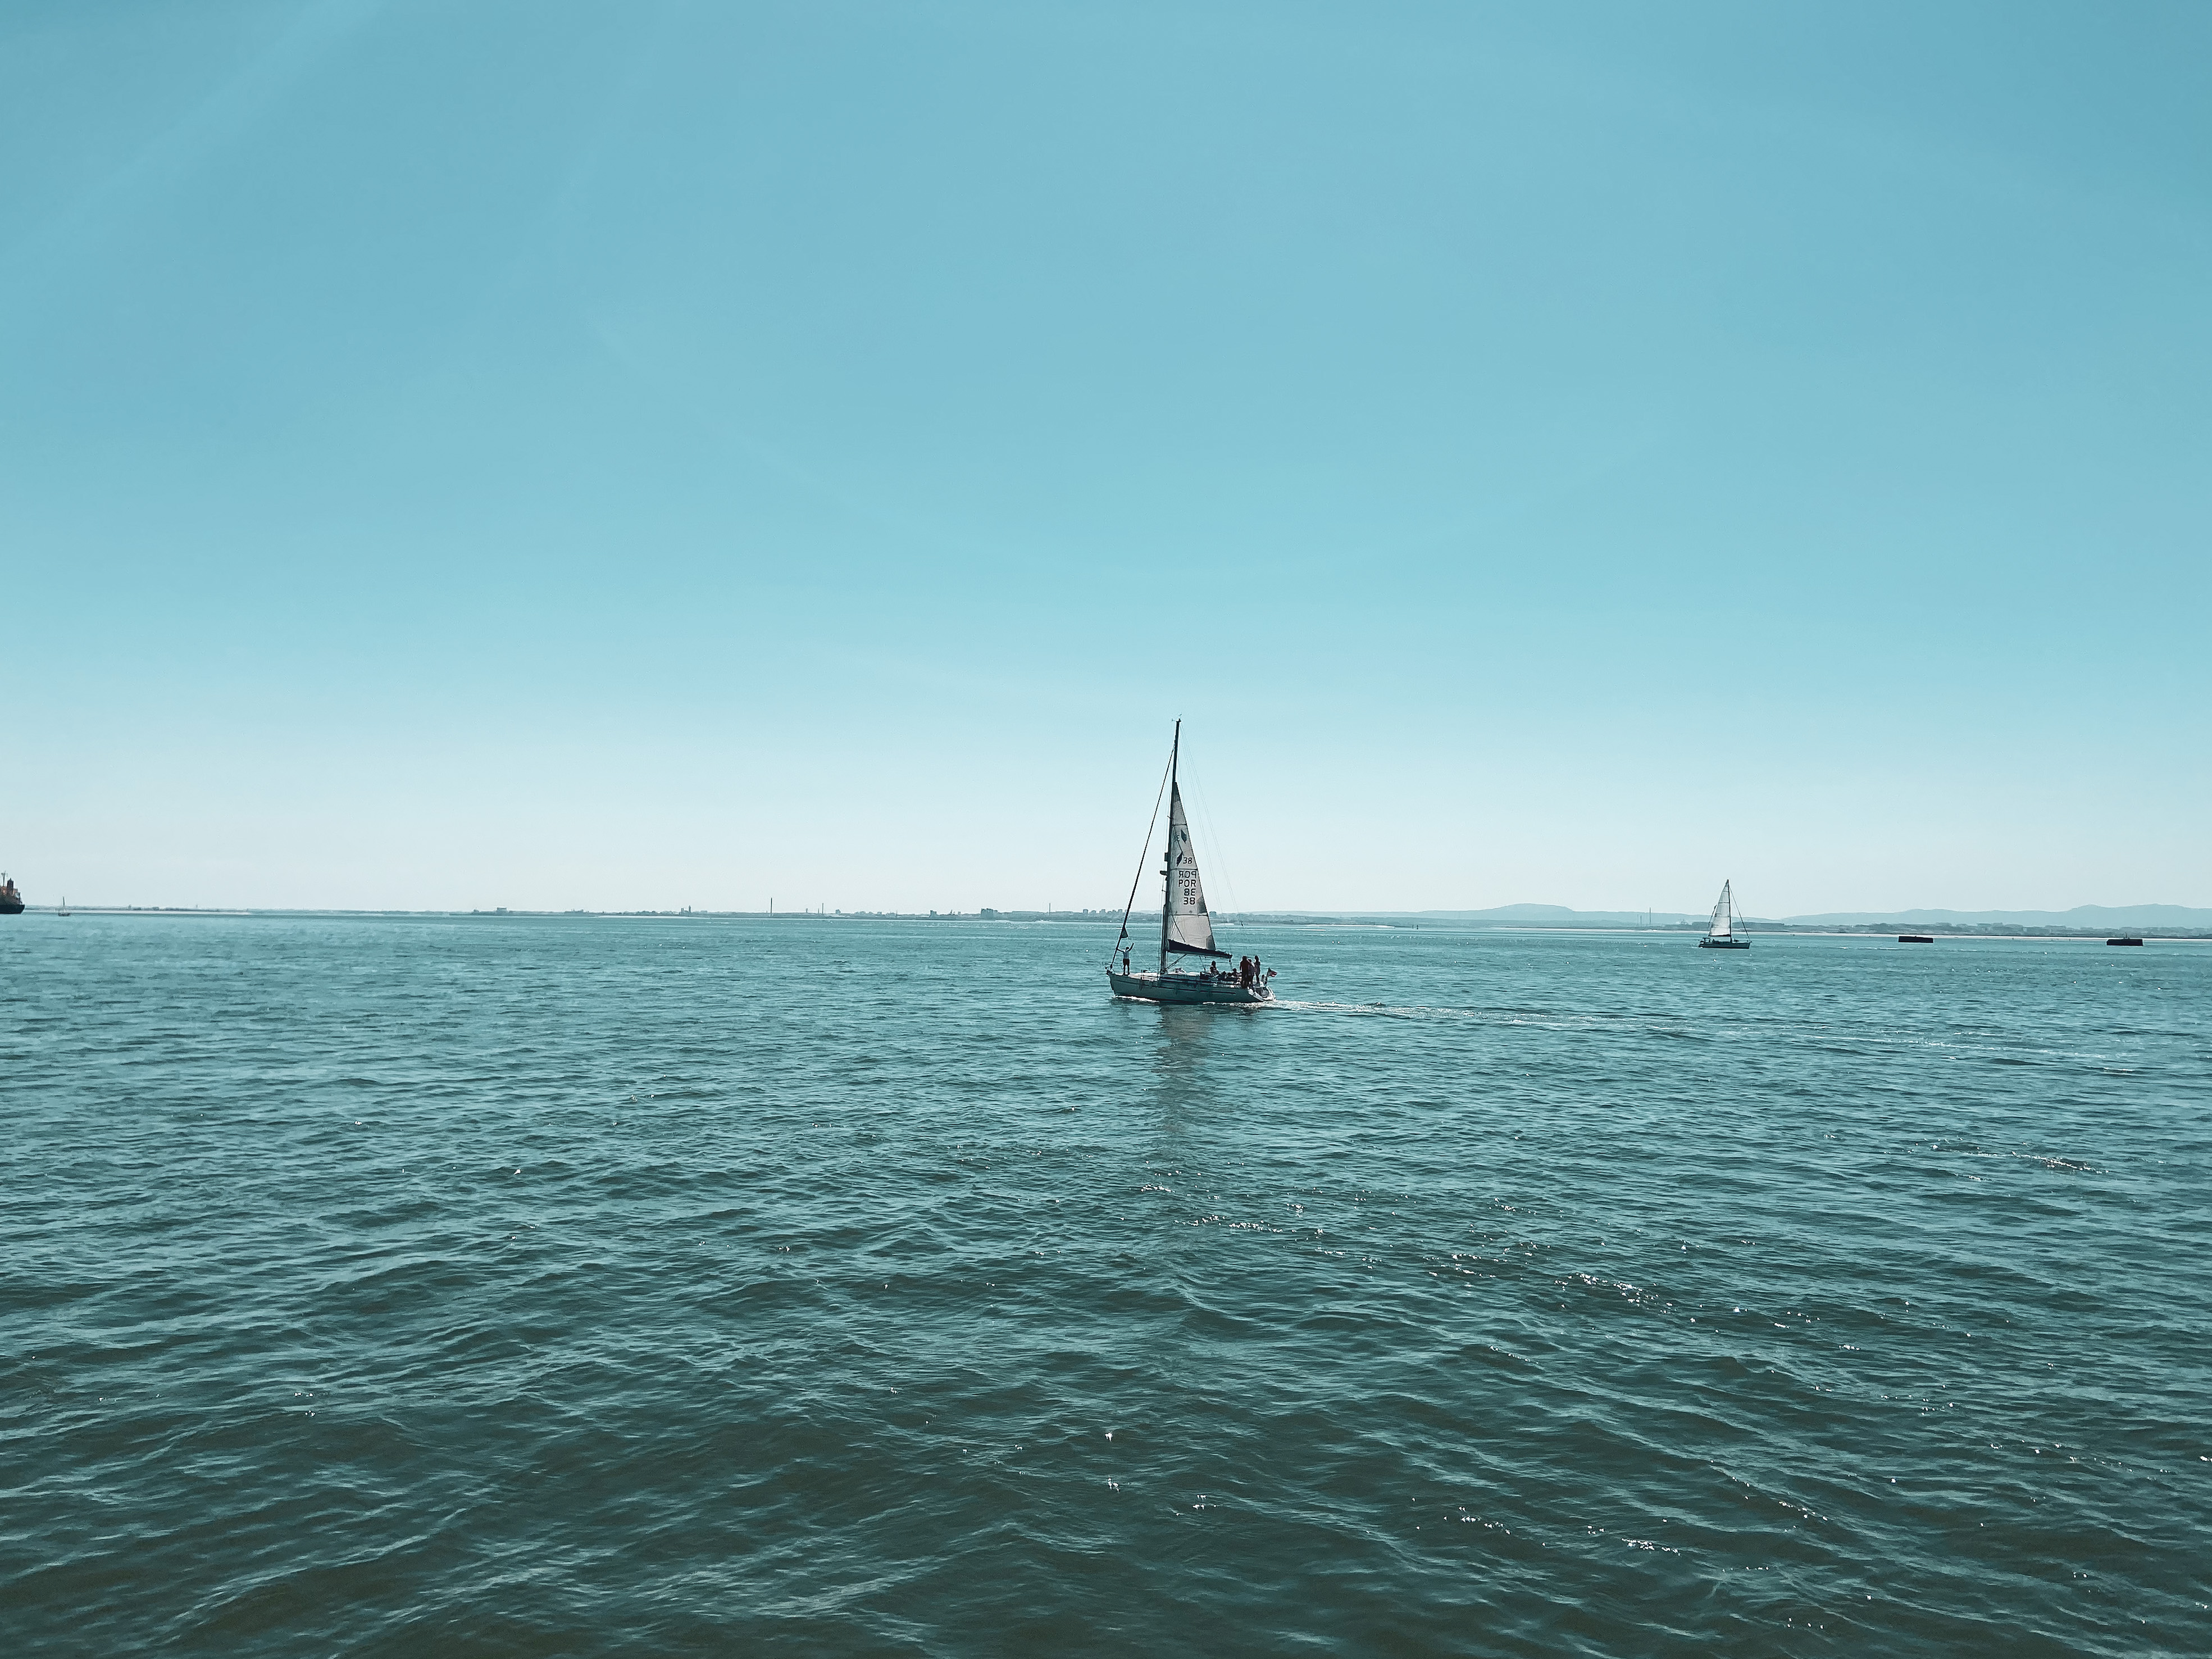 Travel during COVID 19. A sailboat sails across the harbour in Lisbon under a clear blue sky.